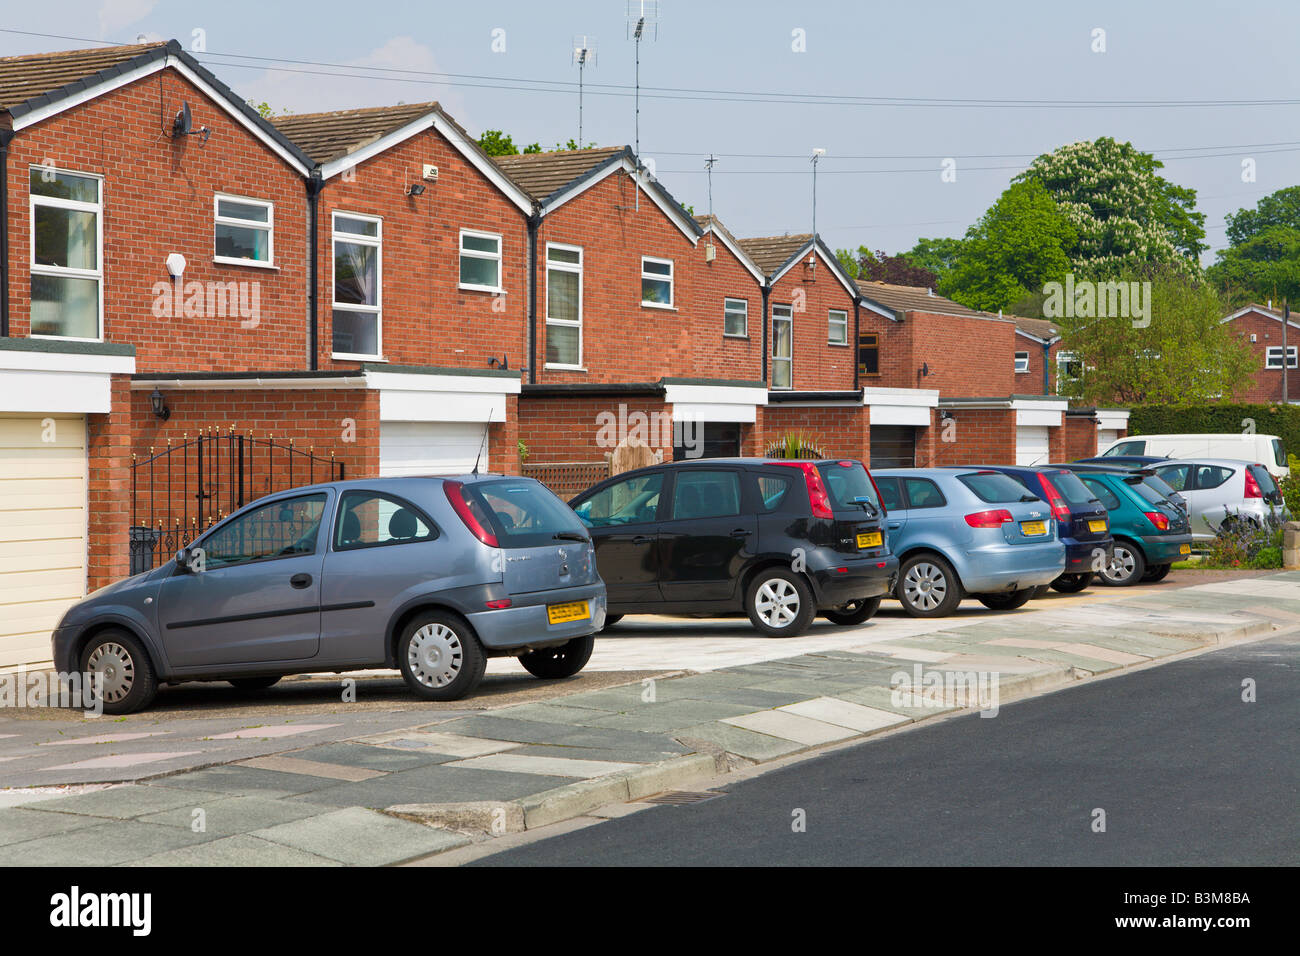 Row of parked small family cars, Modern housing estate, Wirral, England Stock Photo